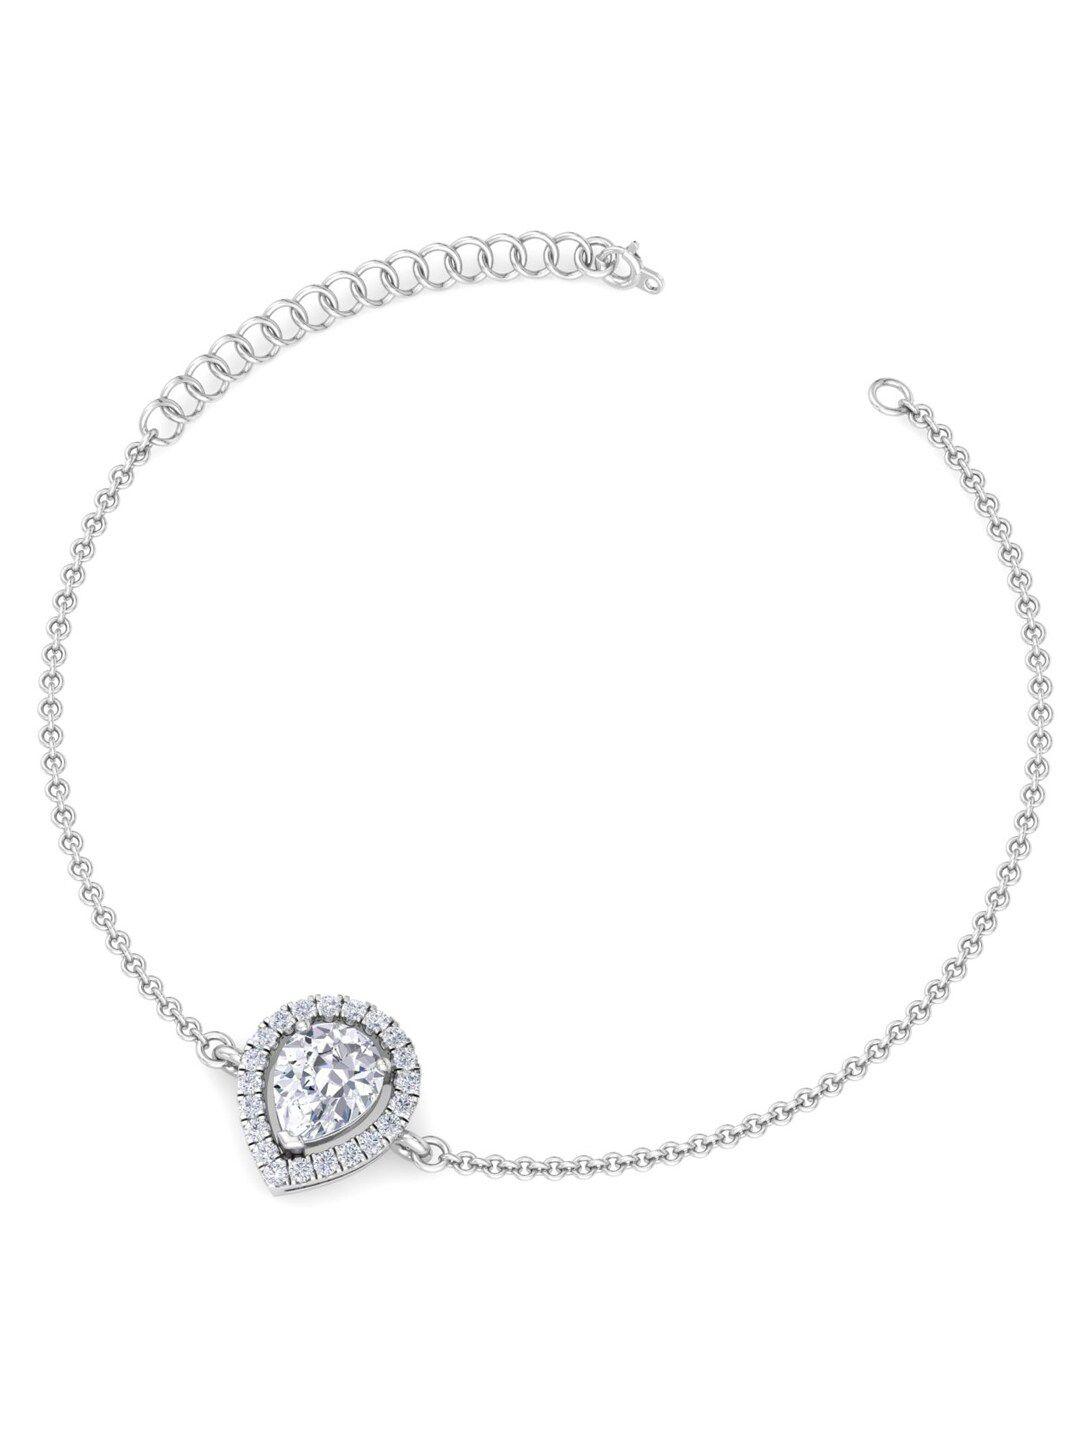 inddus jewels women silver-toned & white sterling silver cubic zirconia rhodium-plated link bracelet